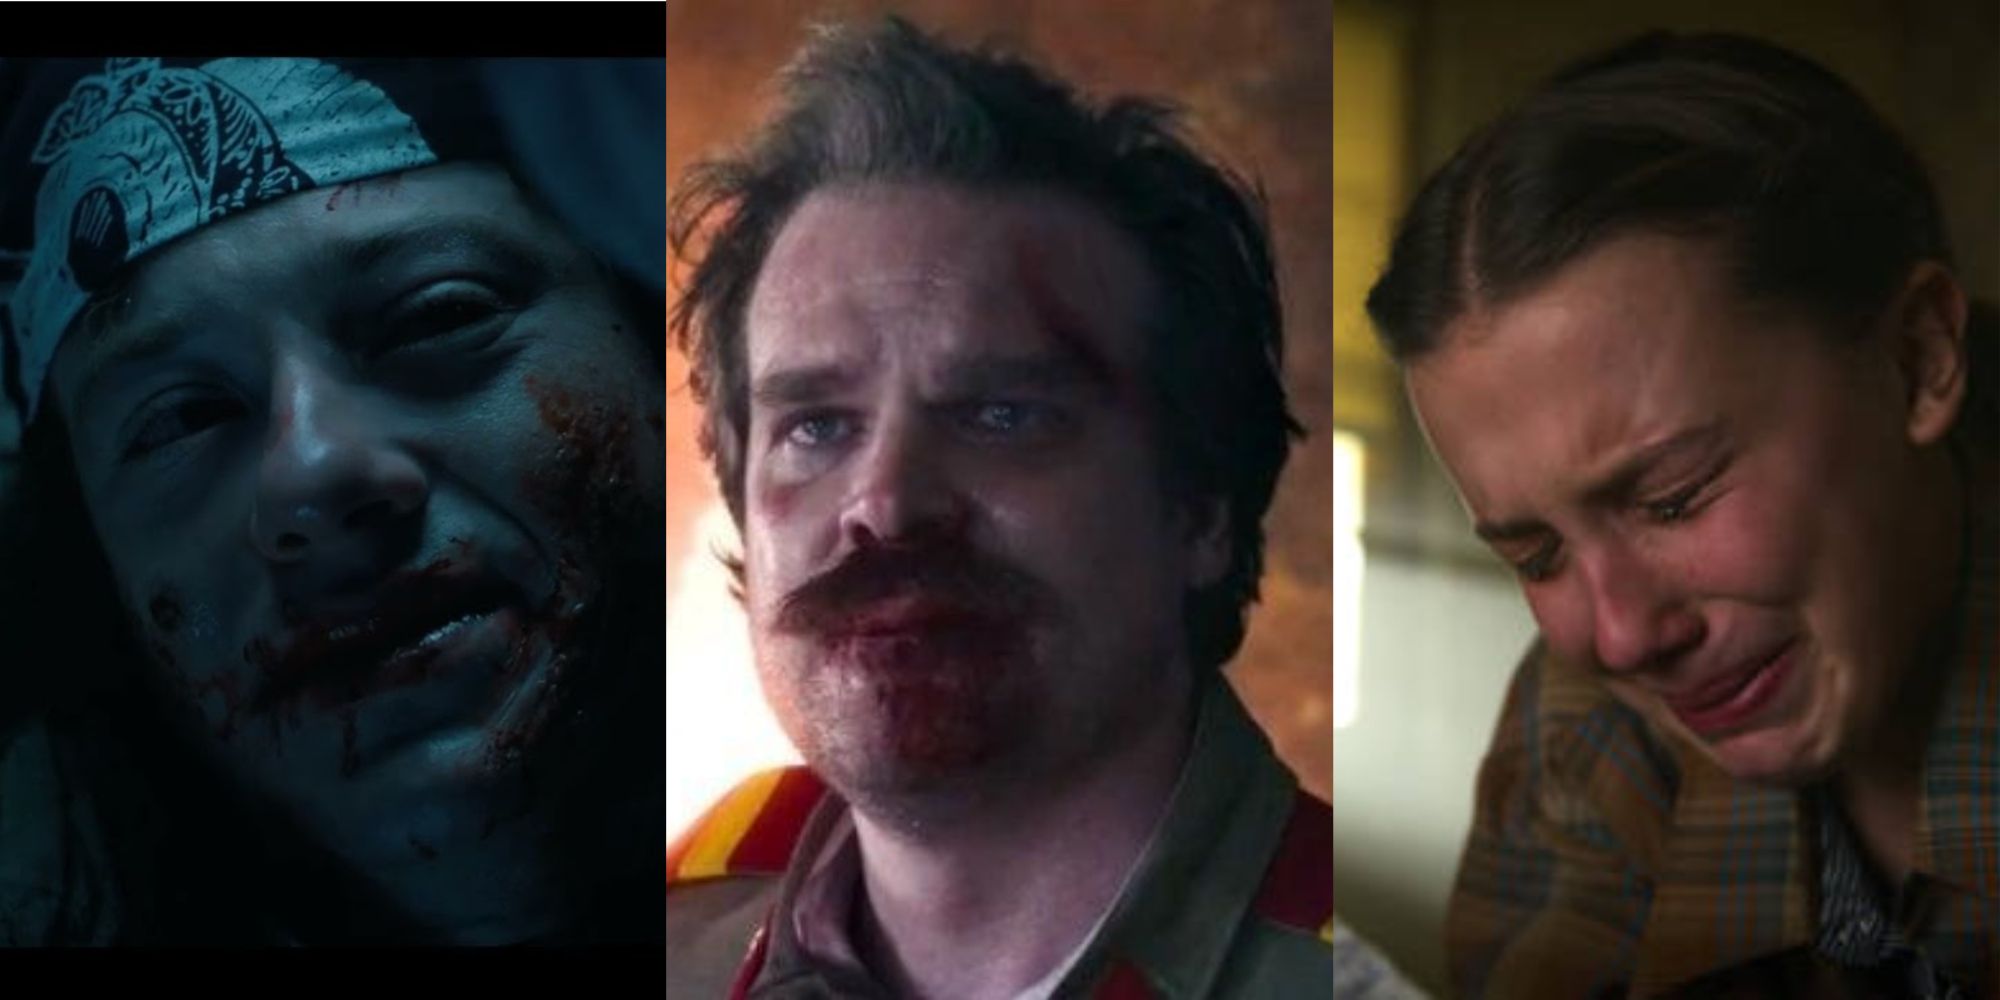 Stranger Things' Deaths, Ranked by How Sad They Are